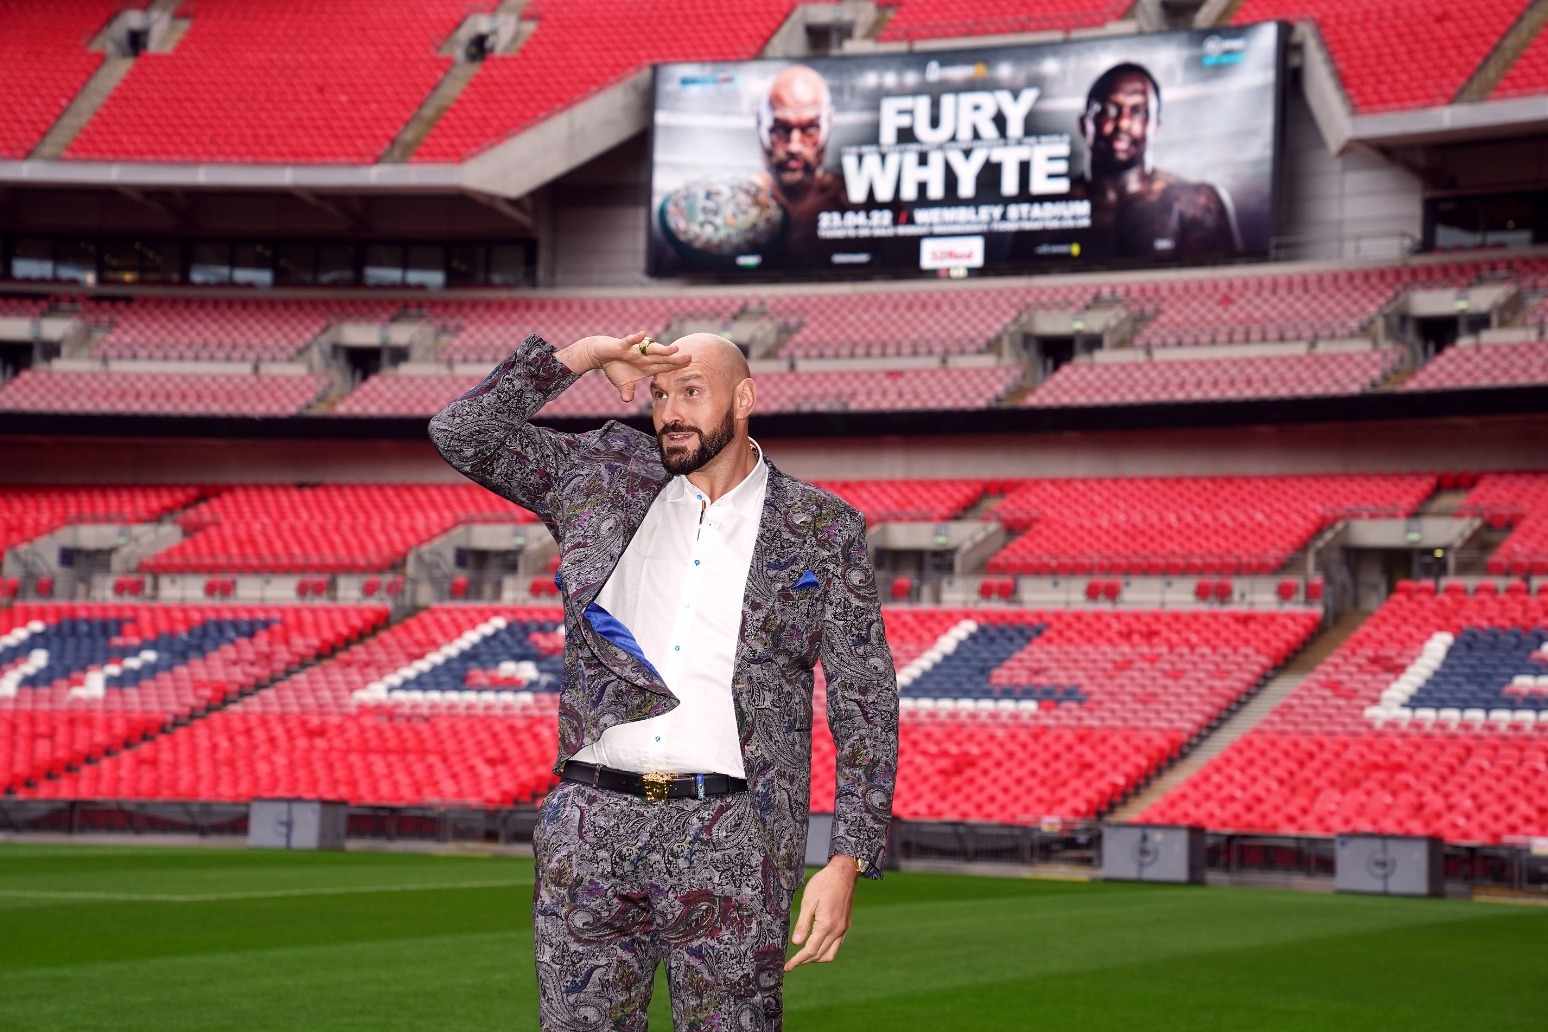 Frank Bruno warns Tyson Fury he faces awkward fight with Dillian Whyte